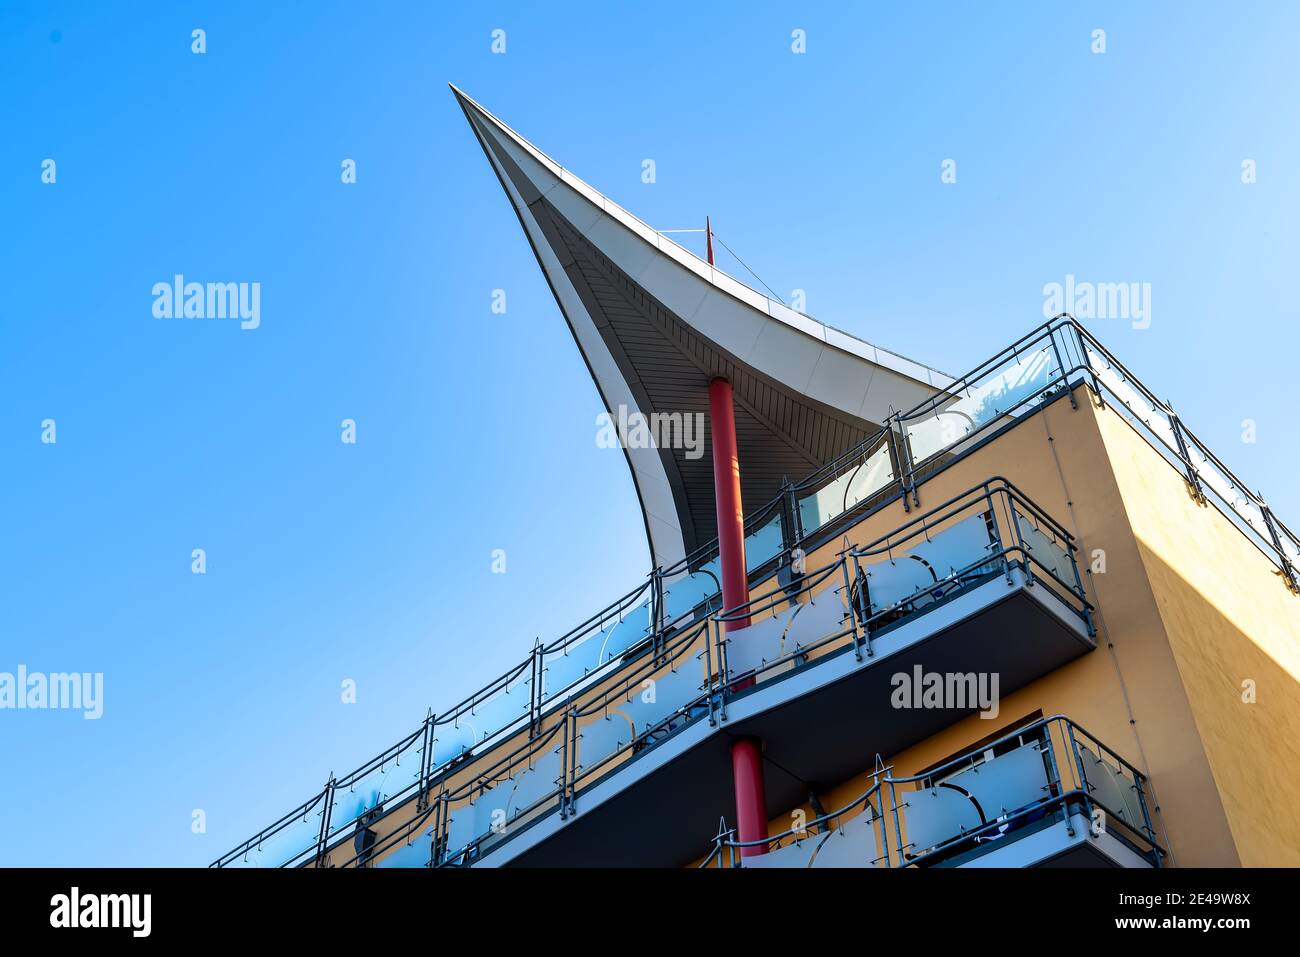 Modern building with balconies and an extraordinary roof structure in the form of a sail supported by a pillar. Stock Photo